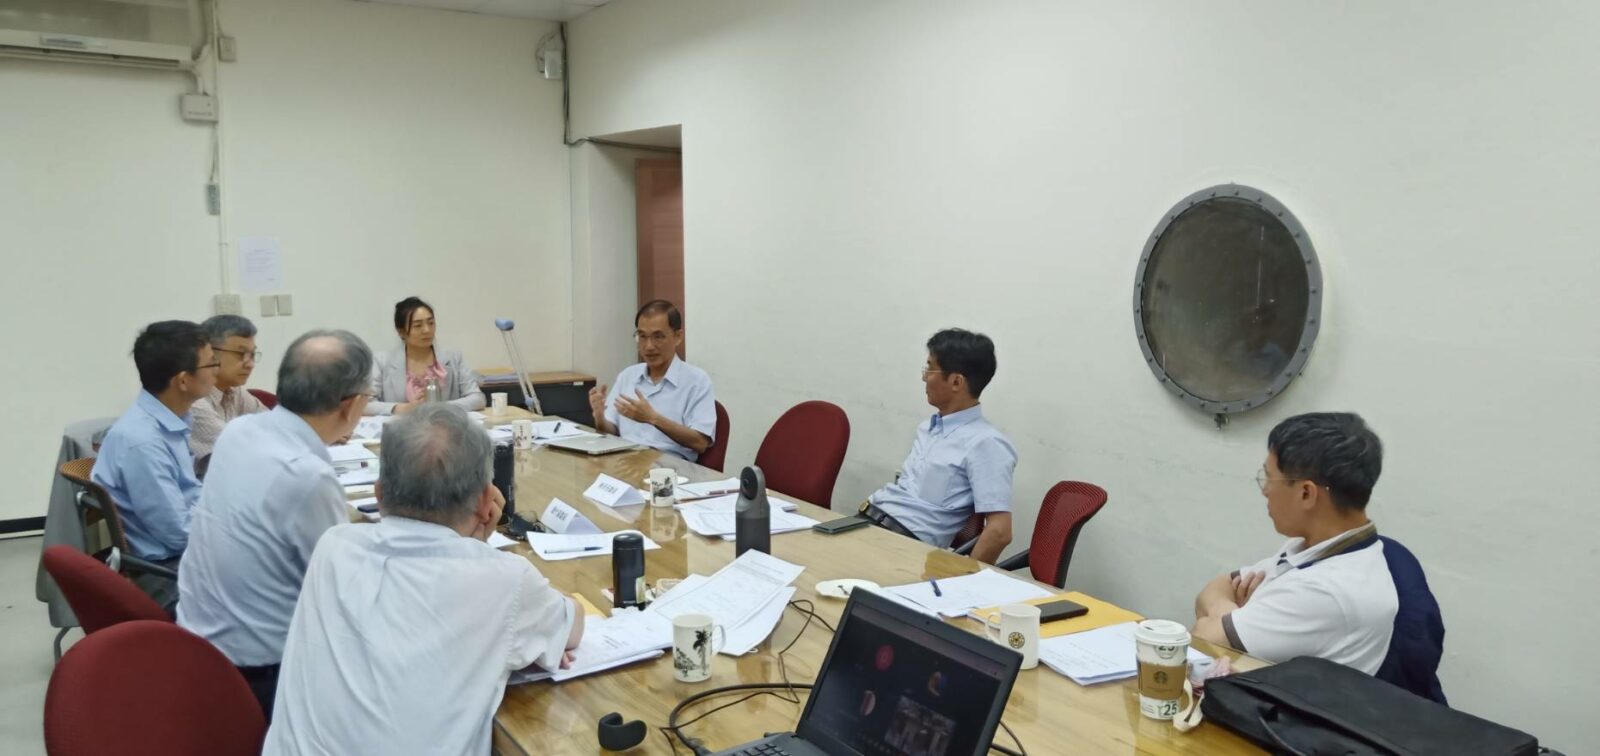 Dr. Huang speaks with committee members at the National Taiwan University Biodiversity Research Center.